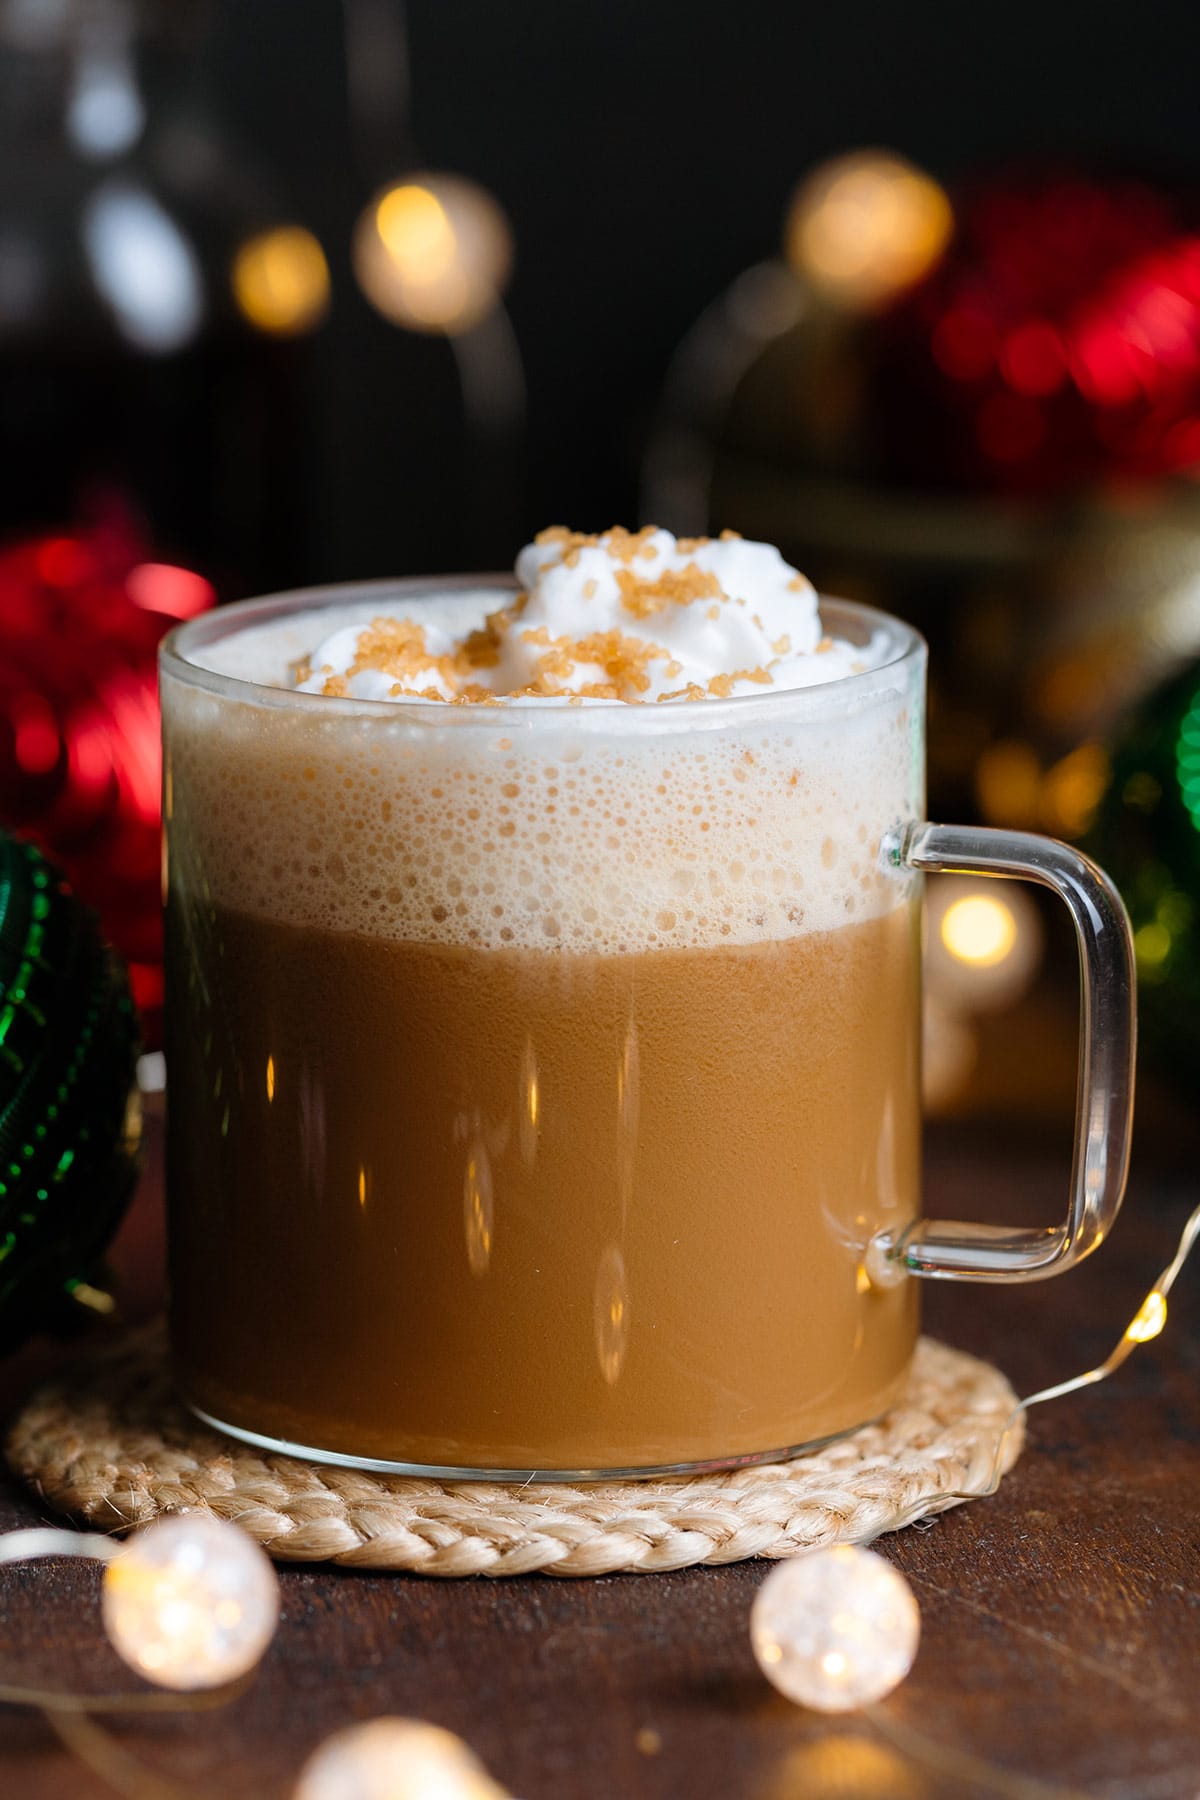 A cafe latte in a glass mug with whipped cream and coarse sugar on top on a dark wooden background with Christmas ornaments around.